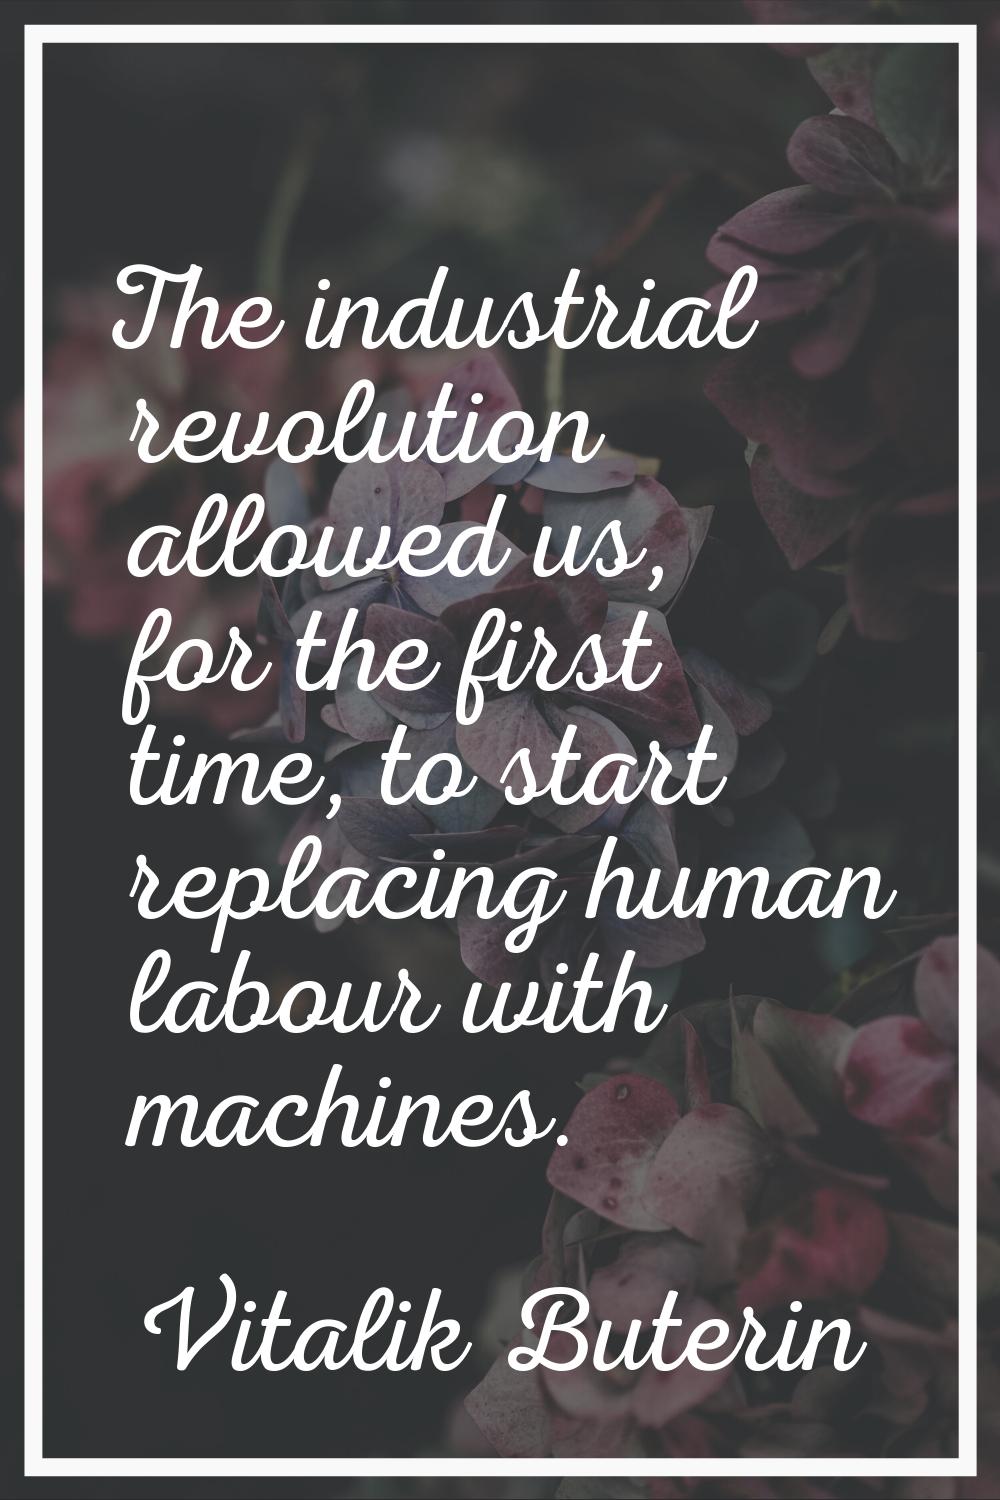 The industrial revolution allowed us, for the first time, to start replacing human labour with mach